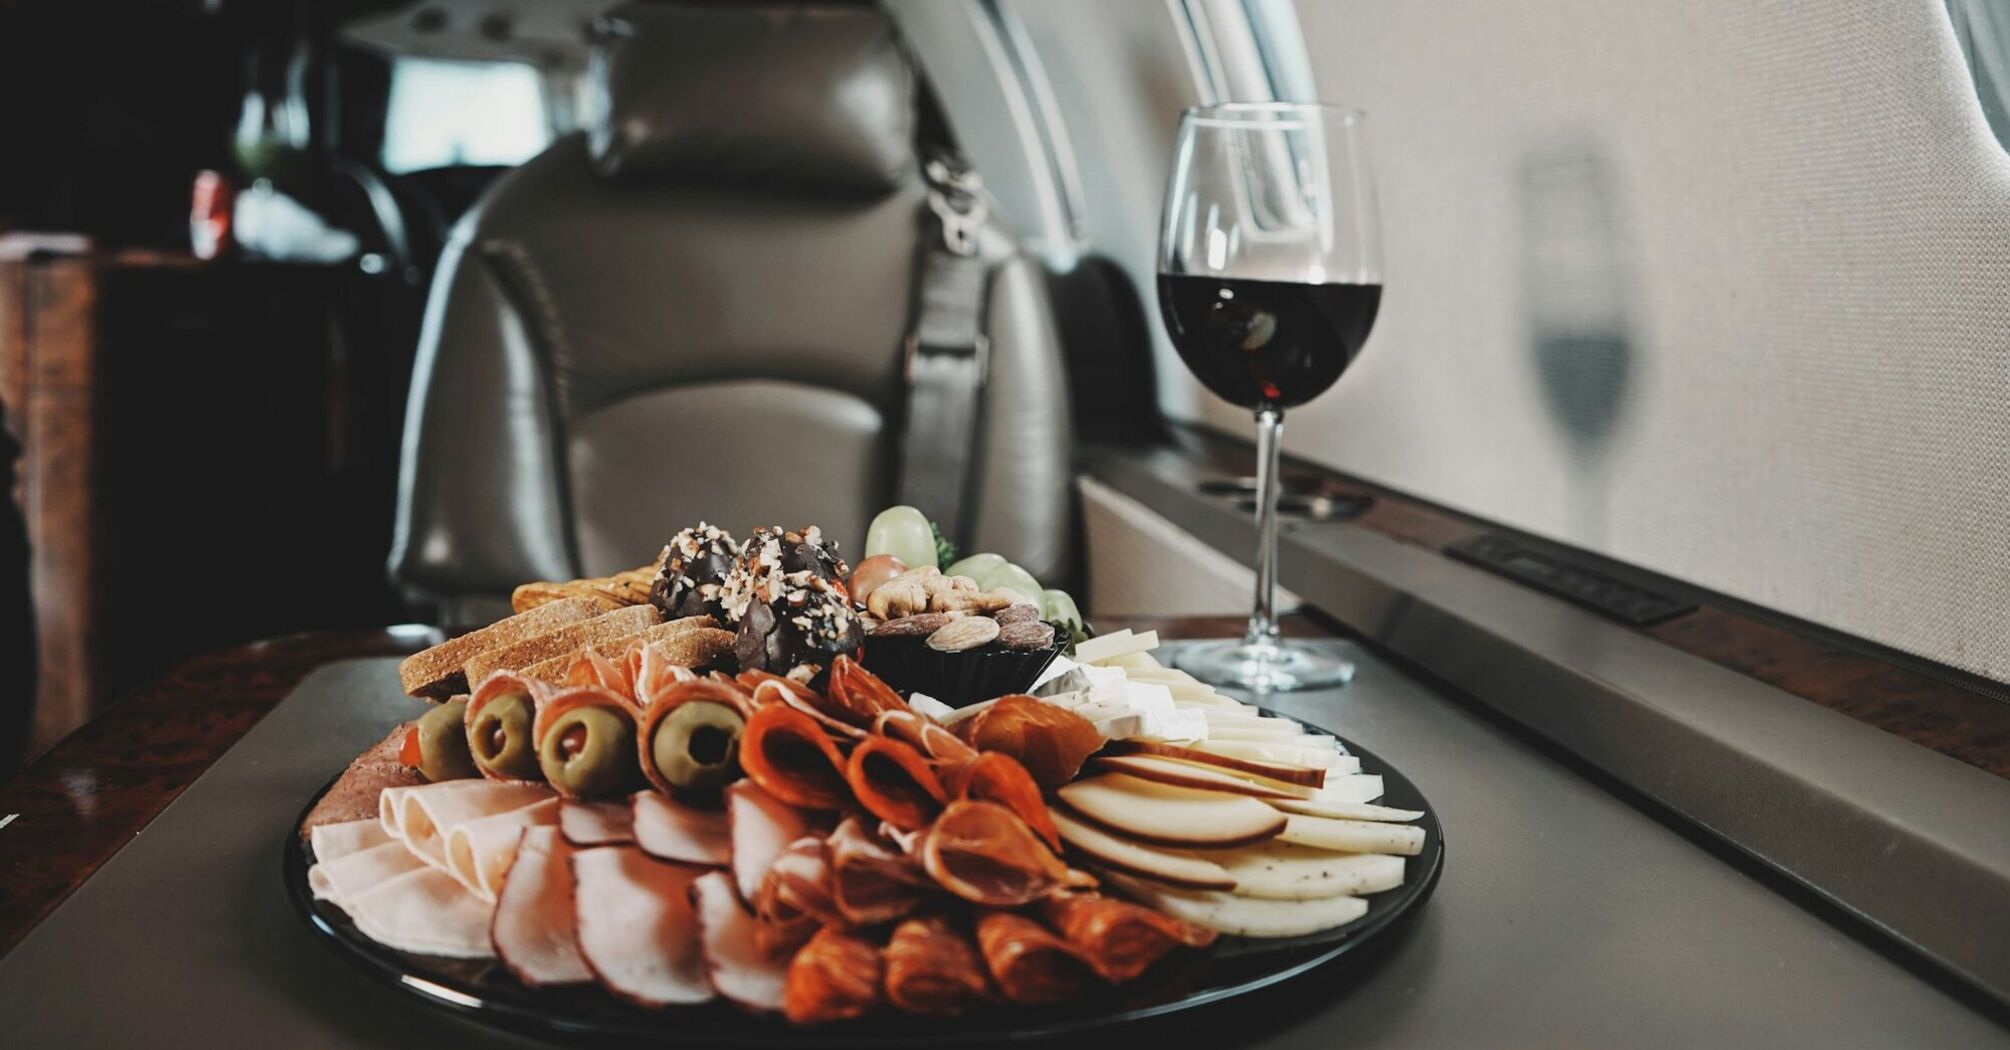 A gourmet charcuterie board with an assortment of meats, cheeses, and nuts, accompanied by a glass of red wine